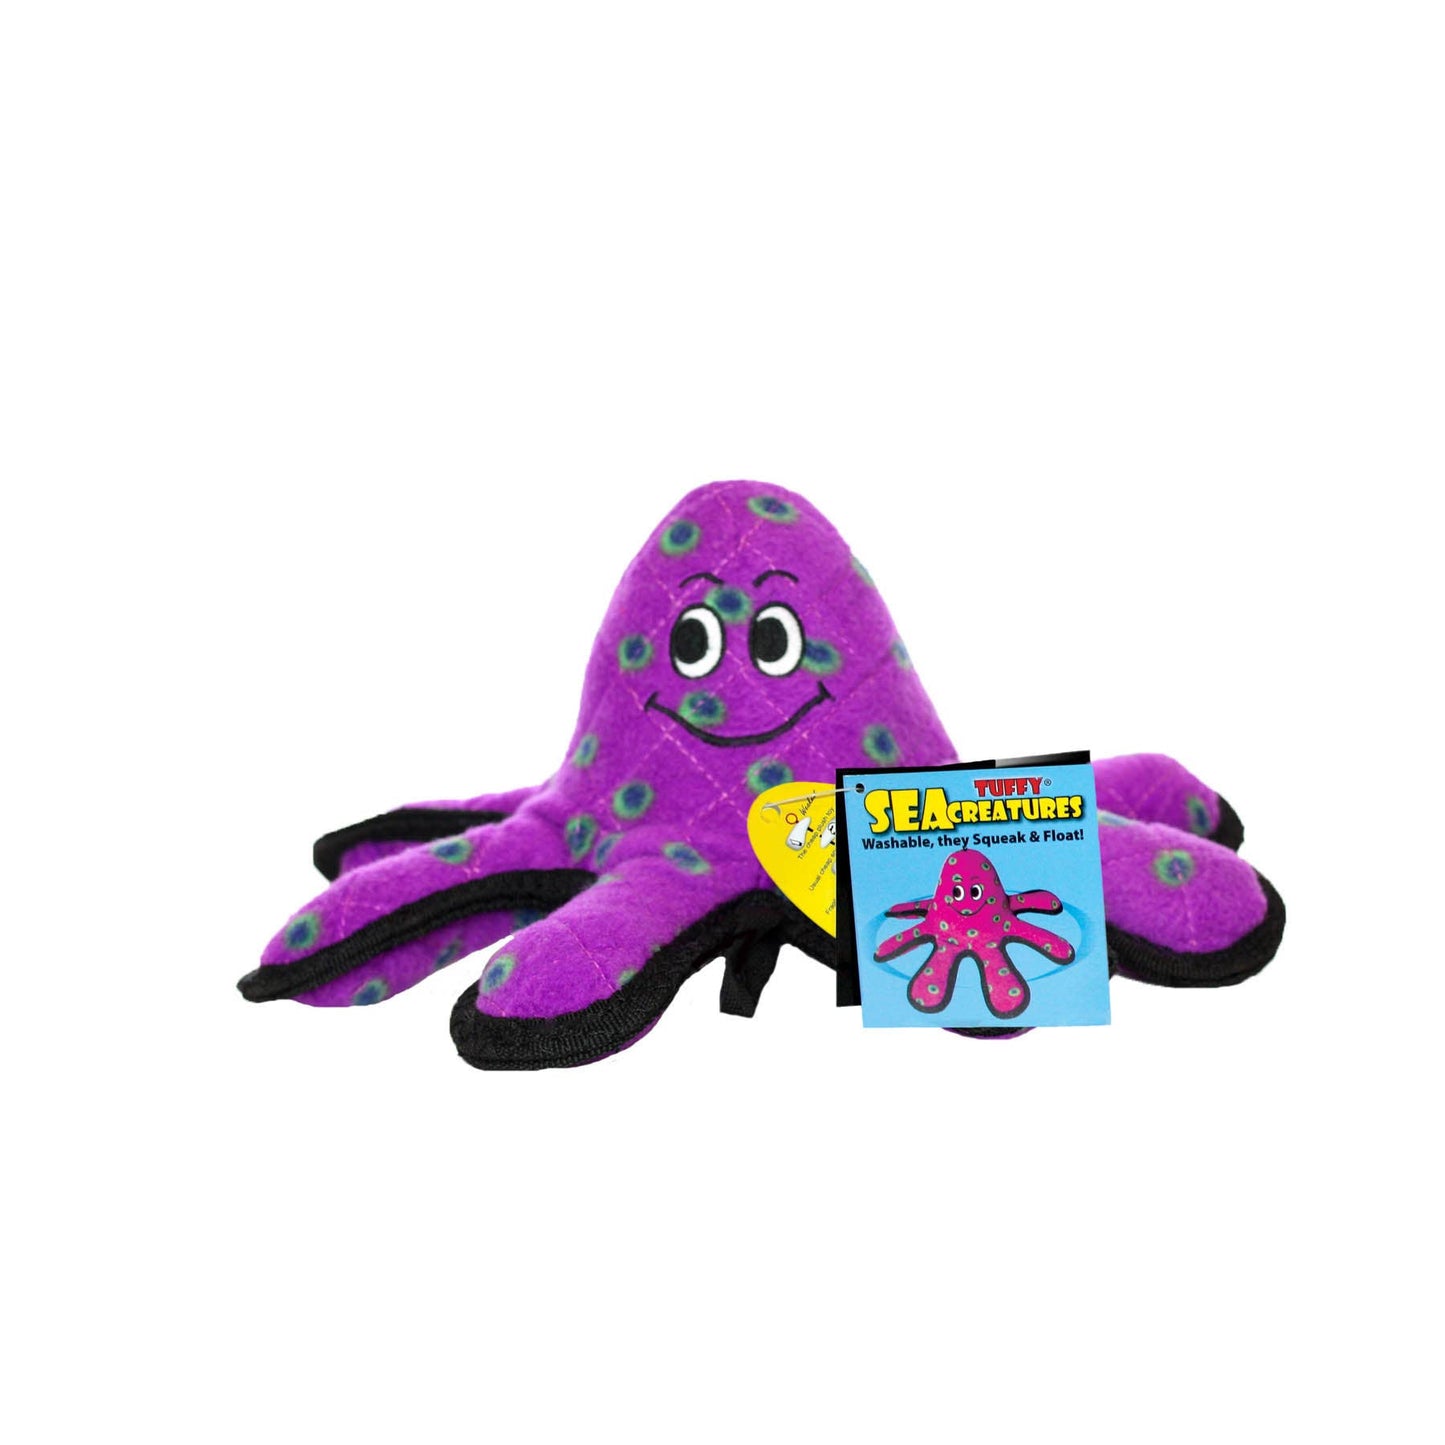 Tuffy Ocean Small Octopus, Durable, Tough, Squeaky Dog Toy